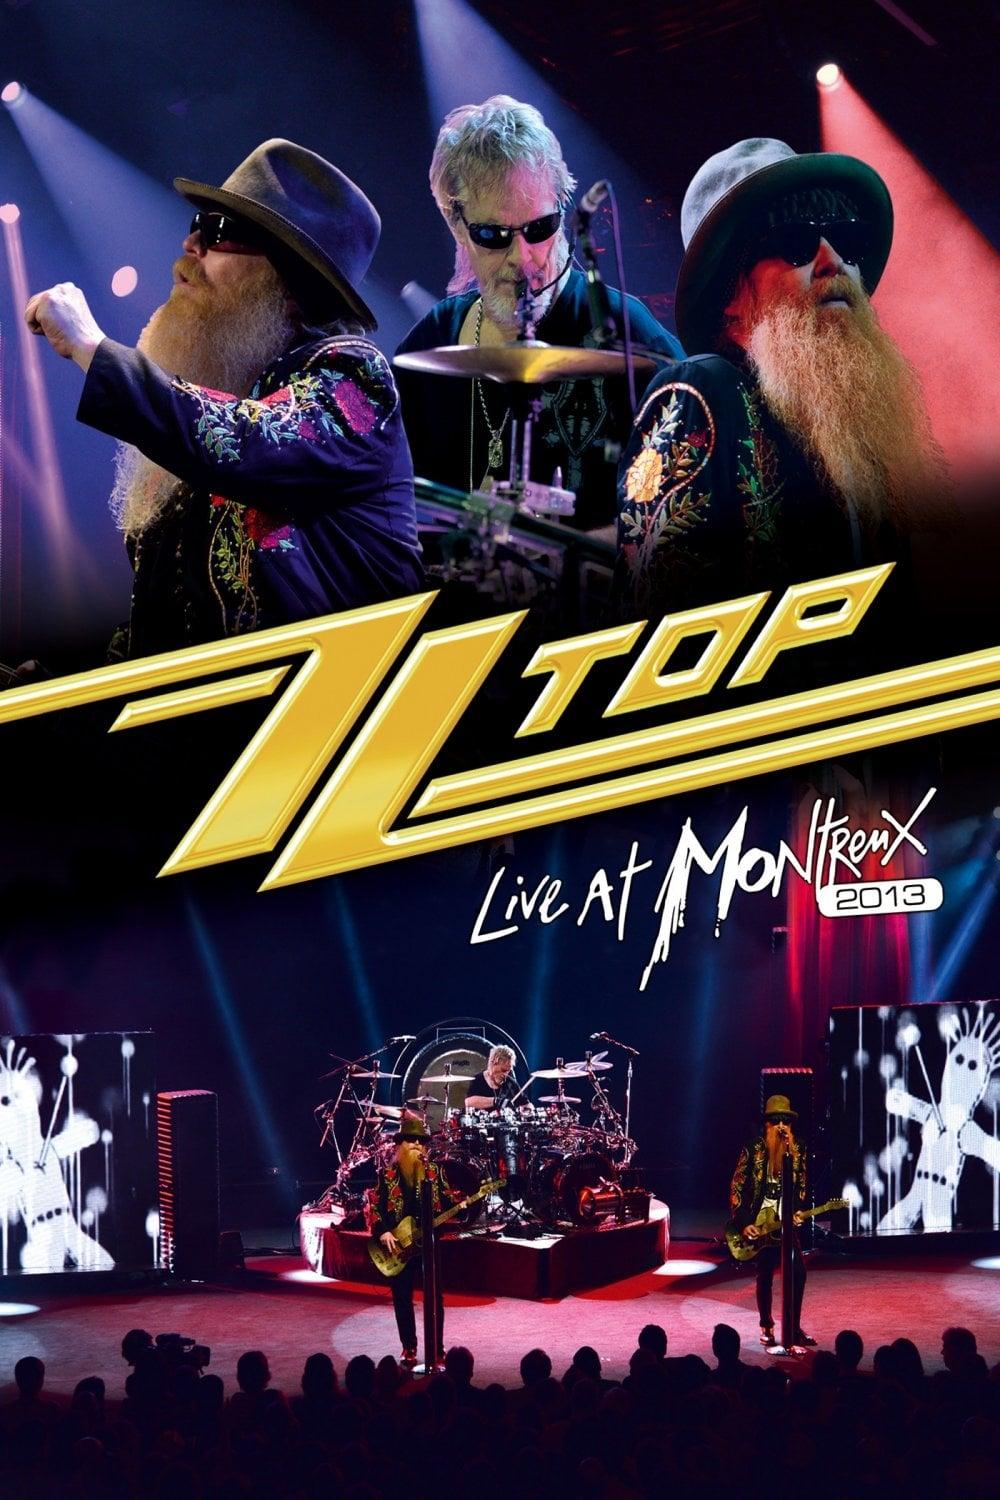 ZZ Top - Live at Montreux 2013 poster